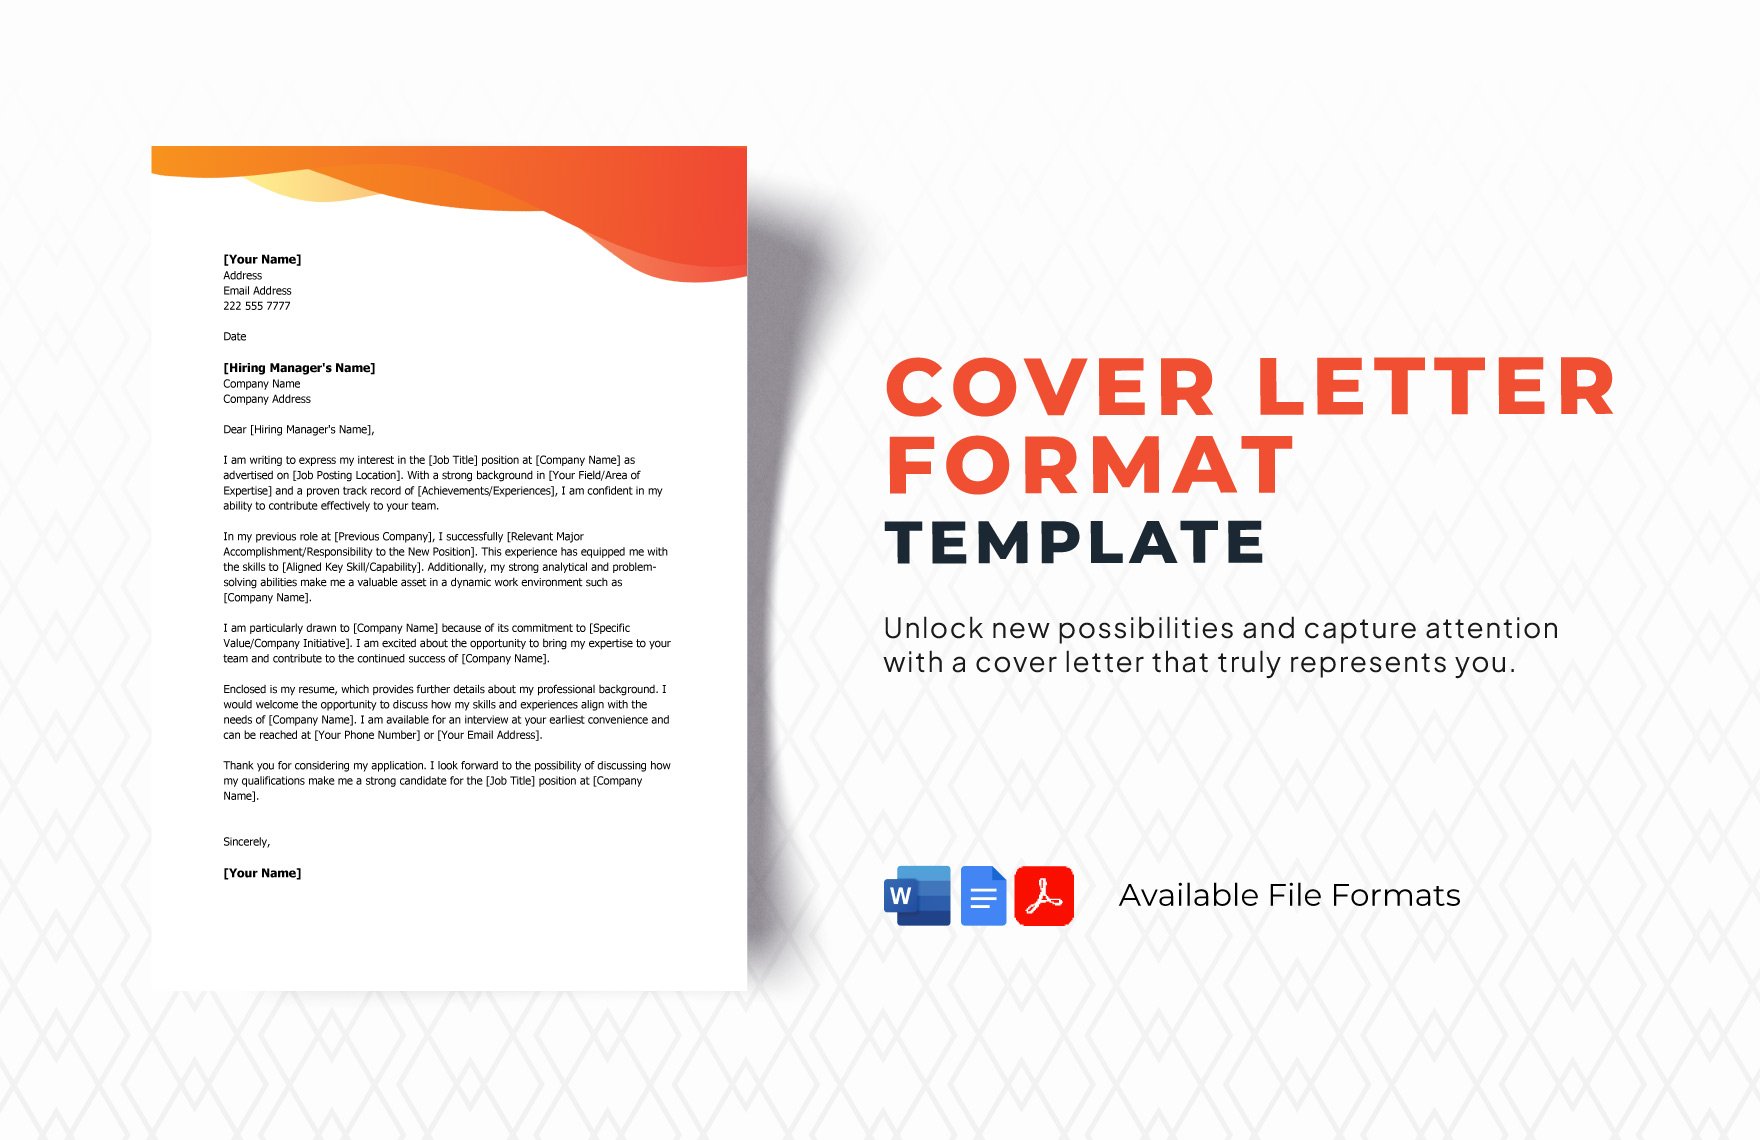 Cover Letter Format Template